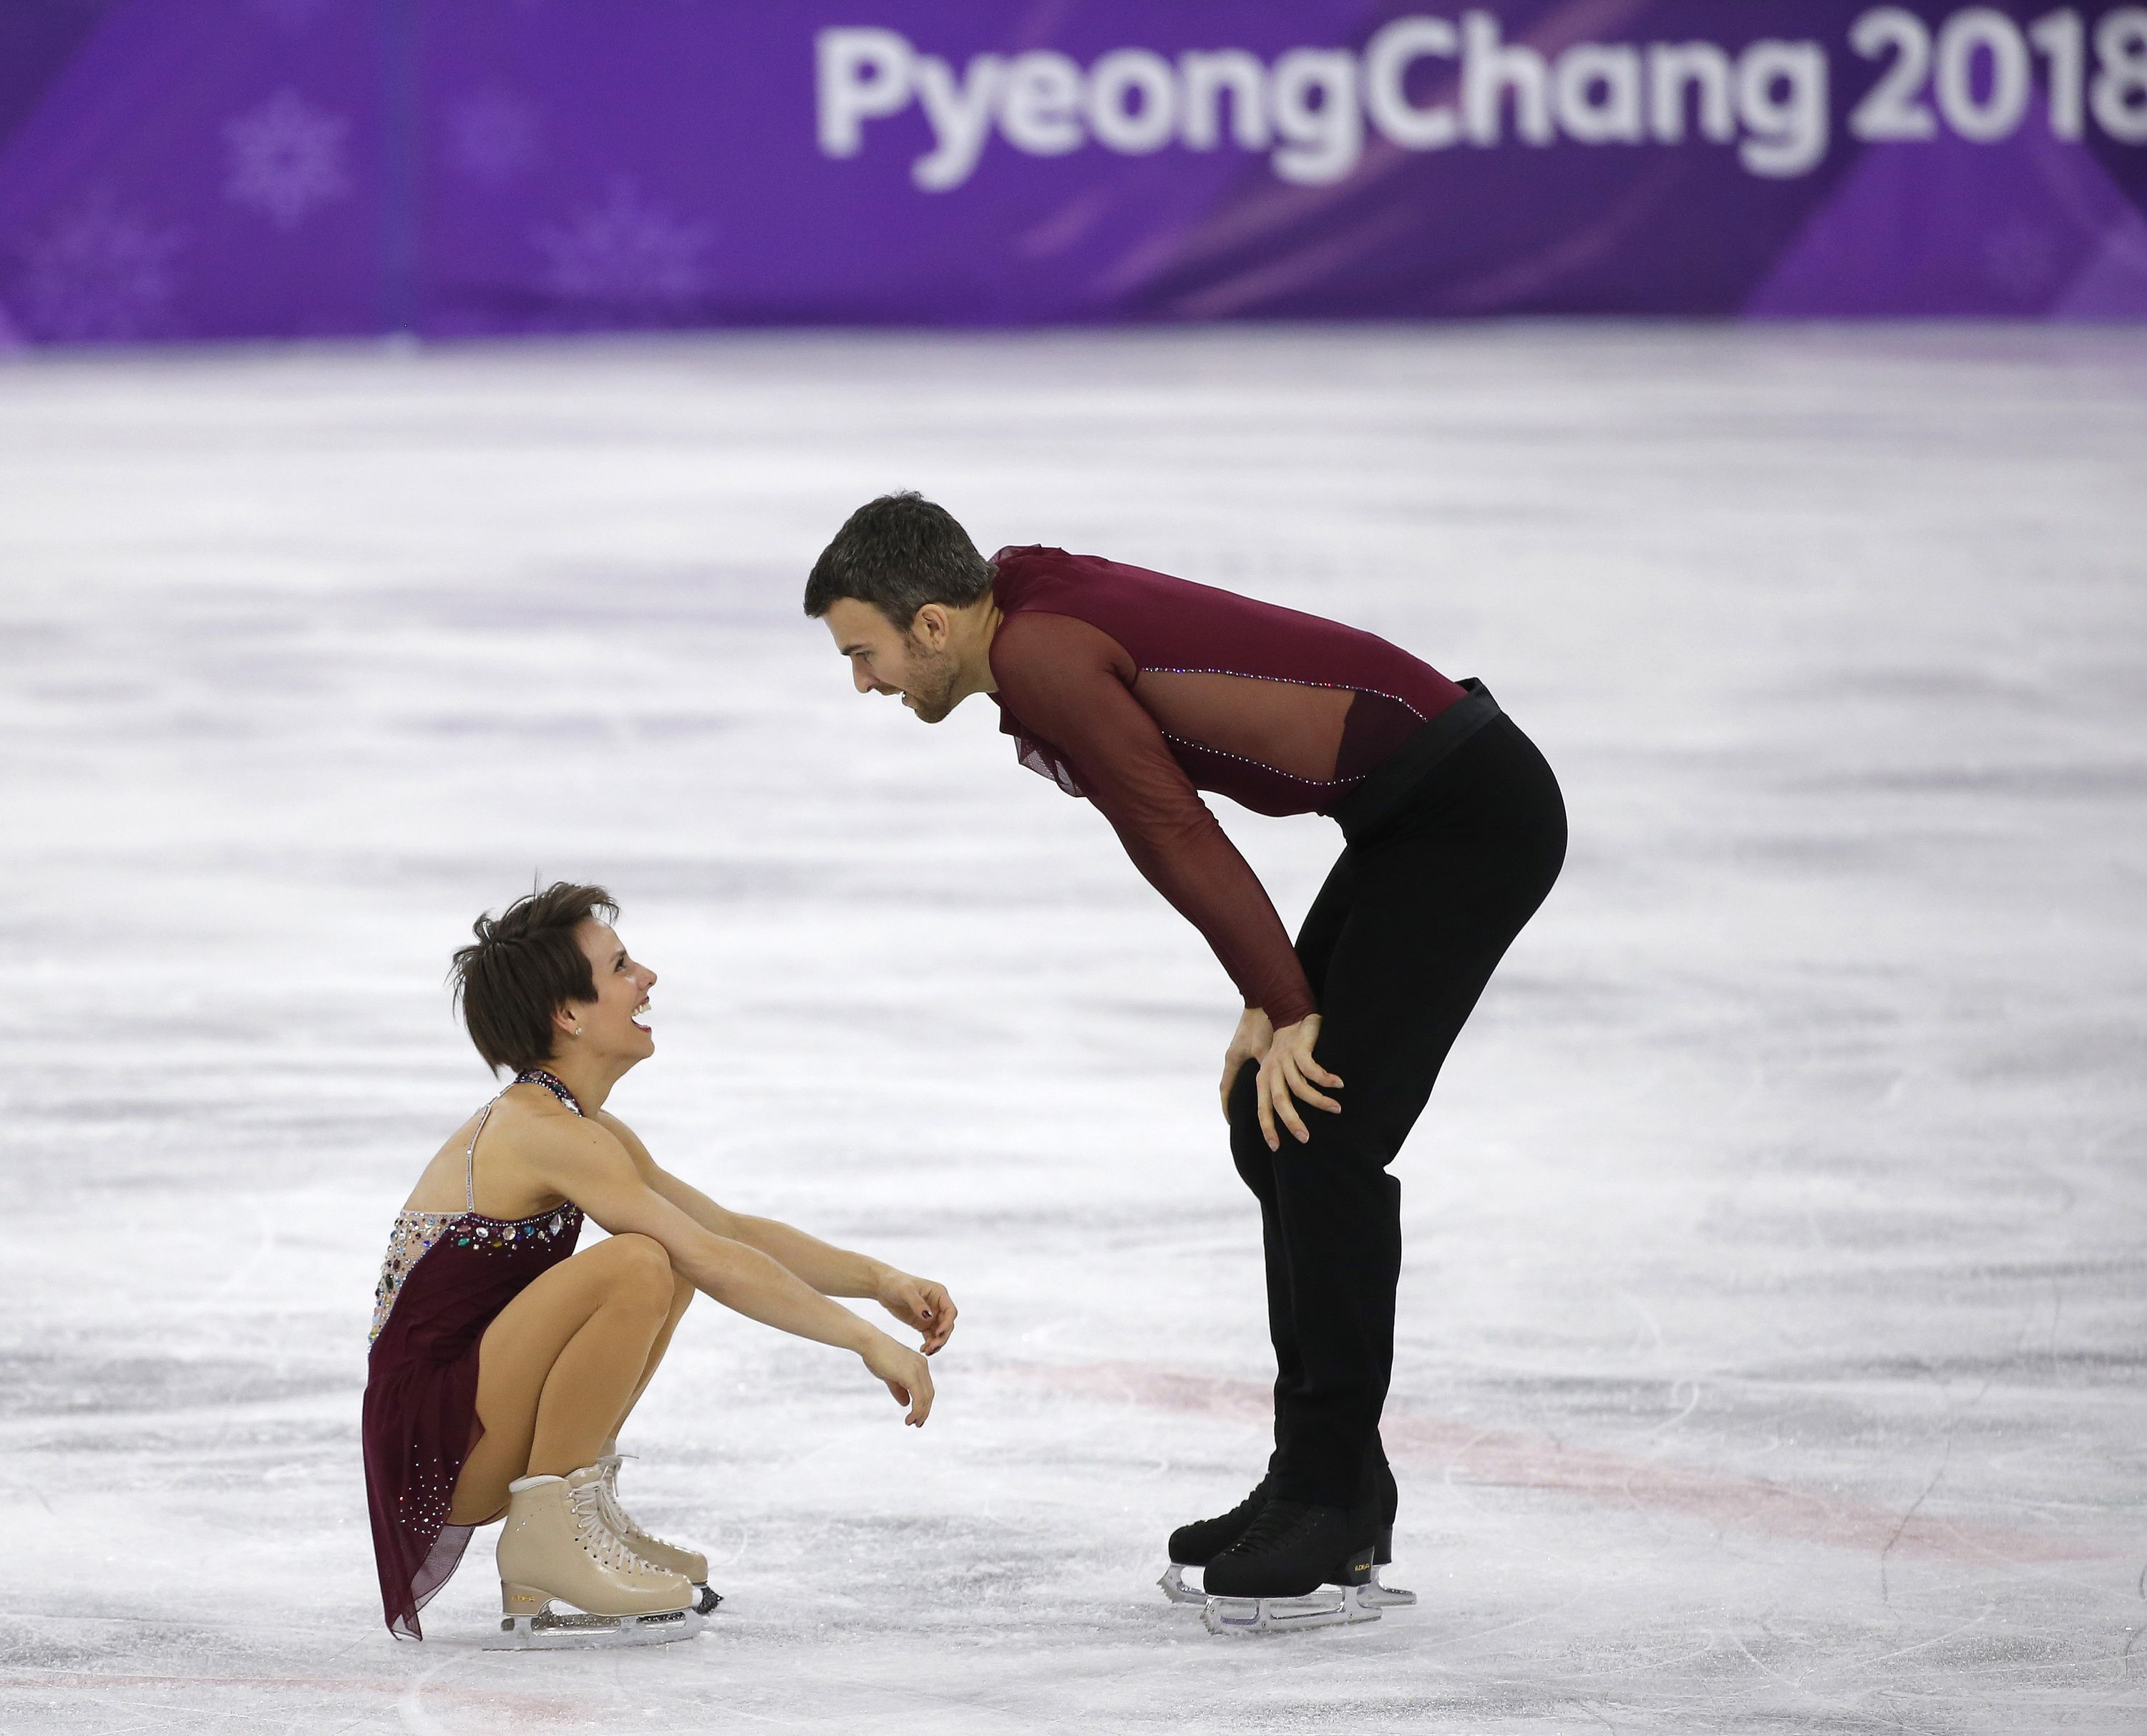 Listen to our Olympic figure skating playlist The best songs so far